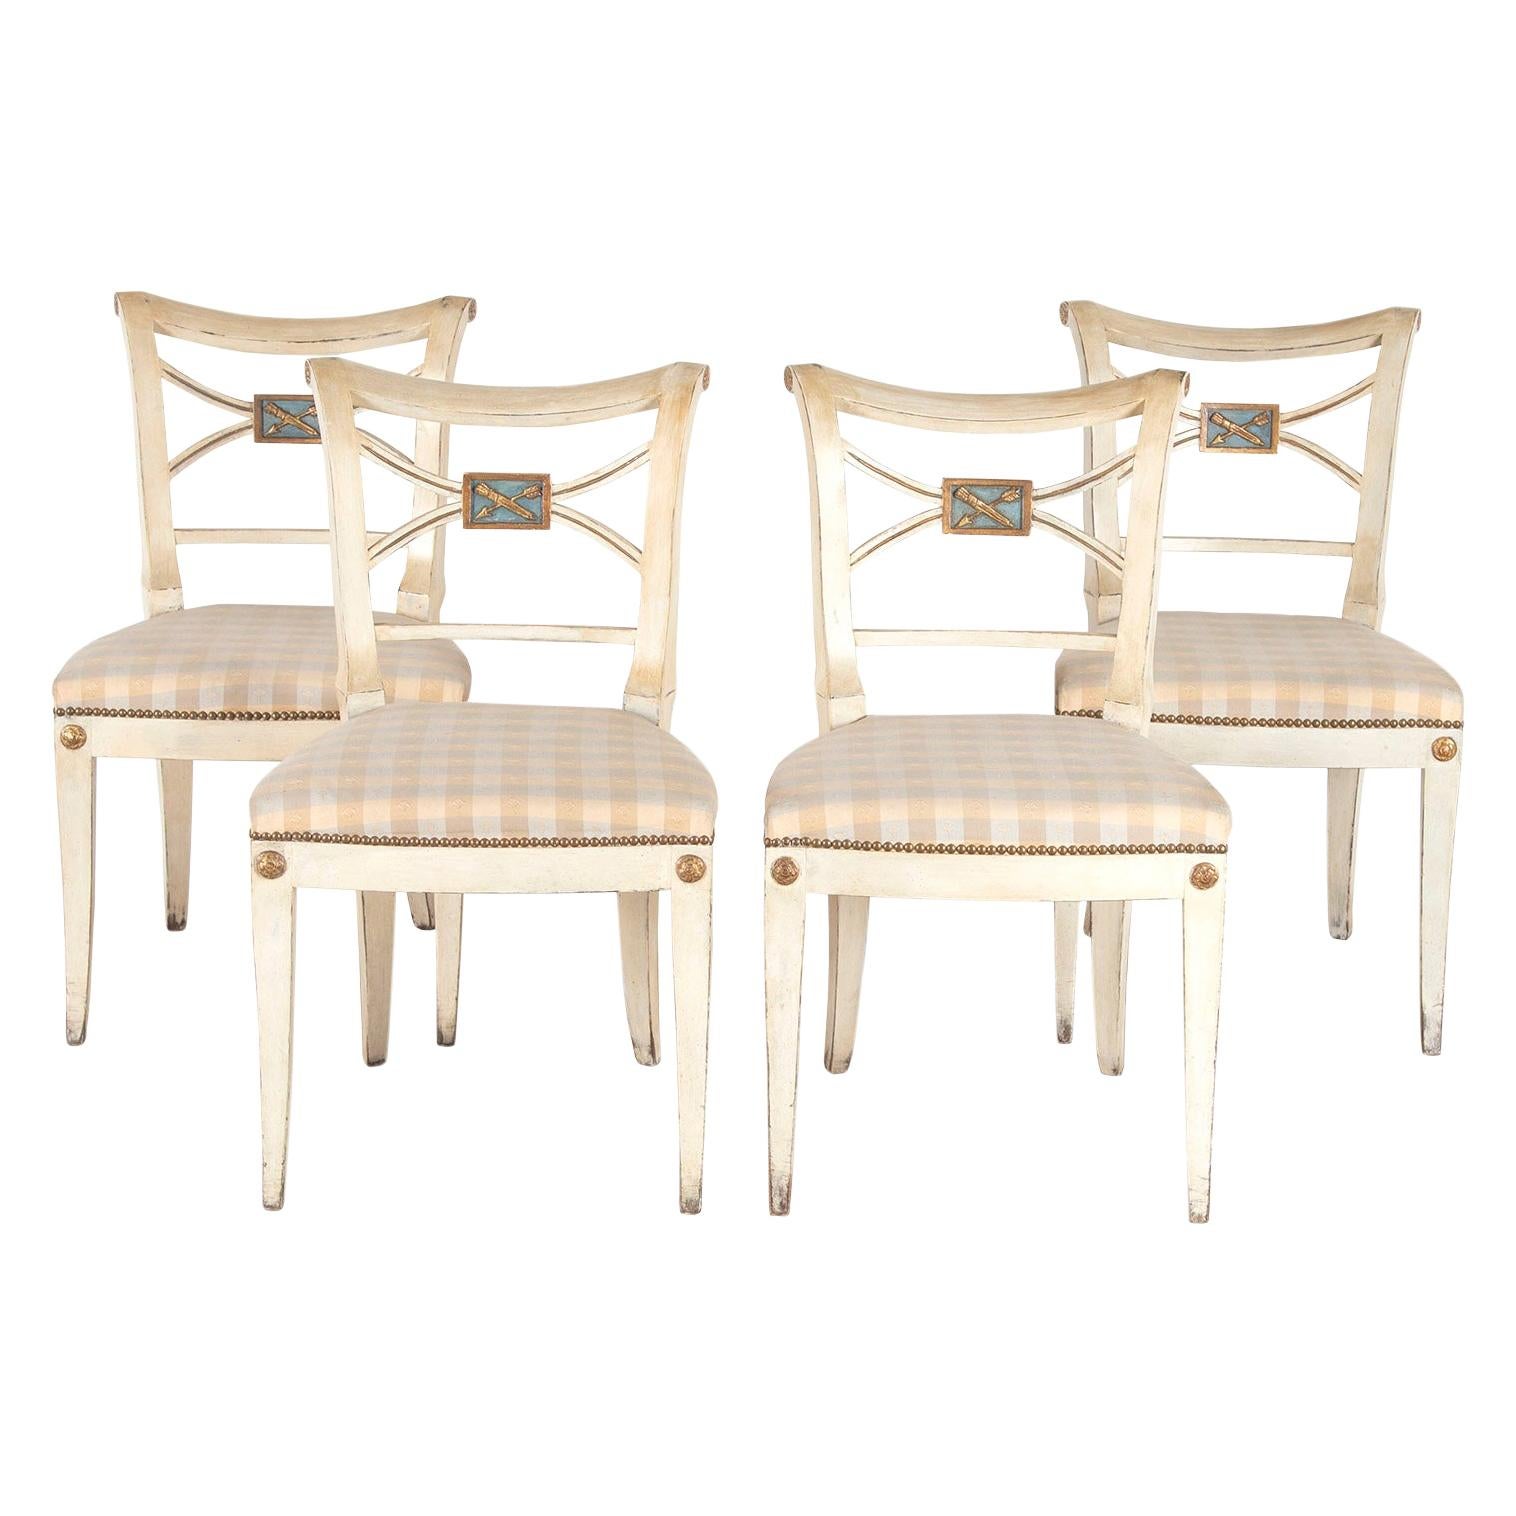 Four Painted Swedish Dining Chairs